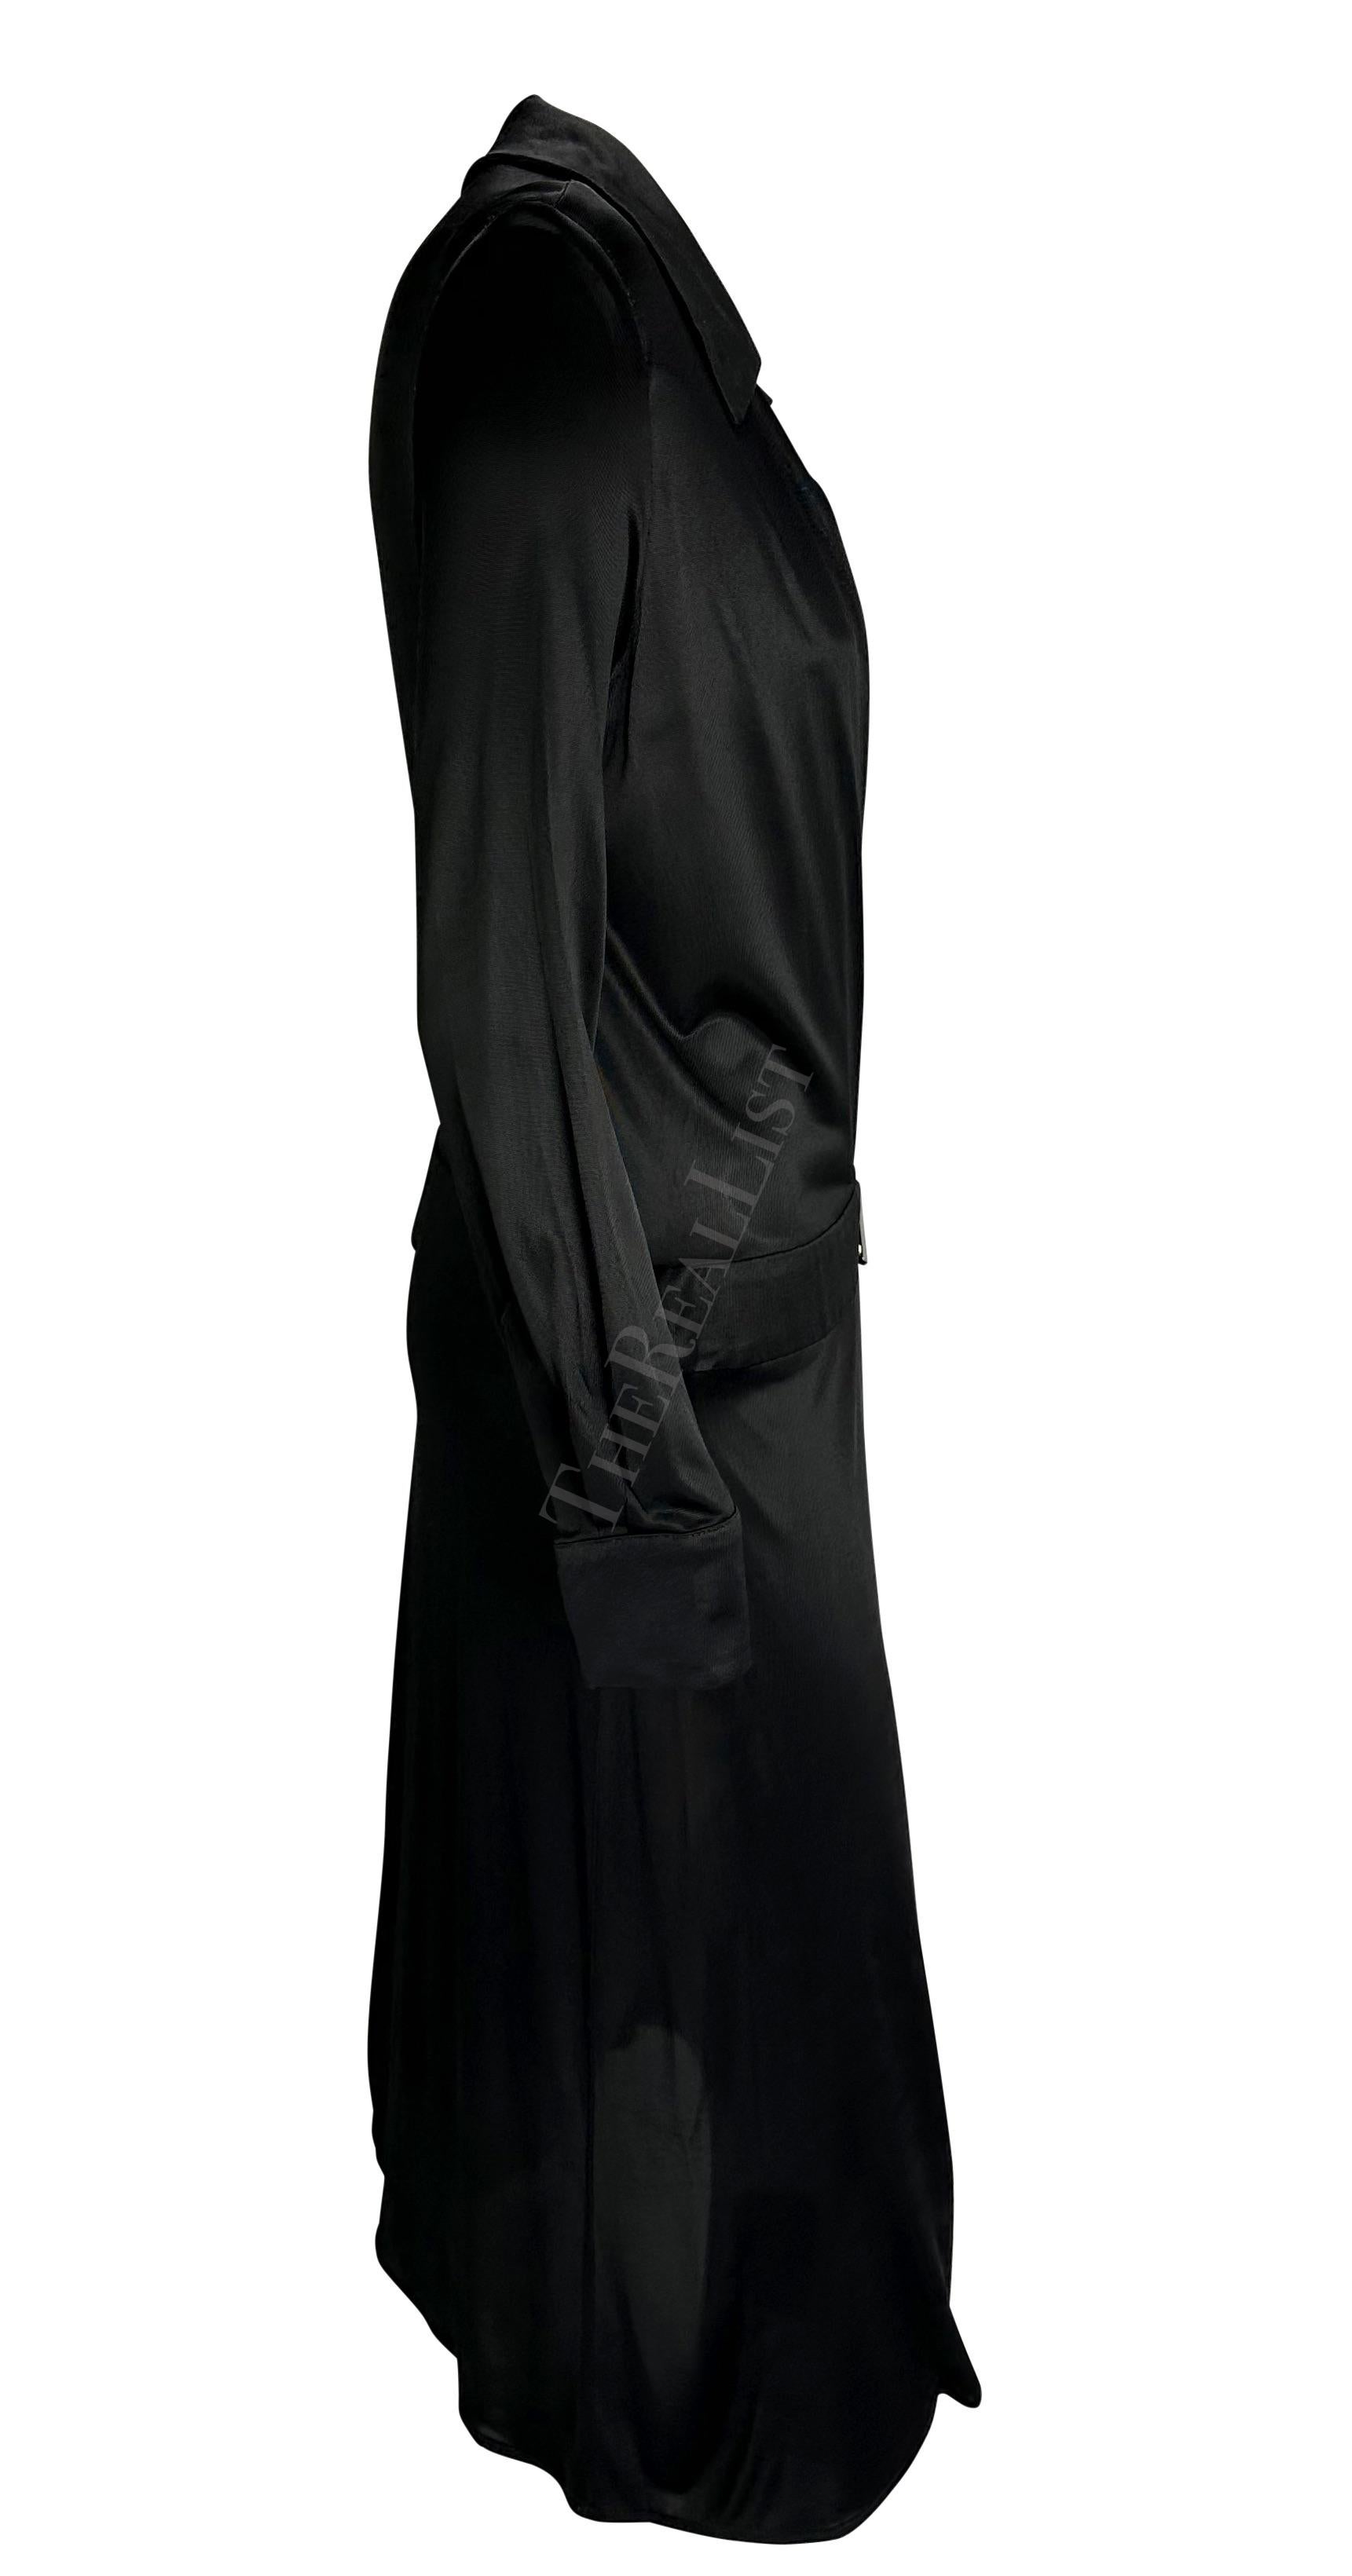 S/S 2000 Gucci by Tom Ford Runway Plunging Neckline Black Viscose Runway Dress For Sale 6